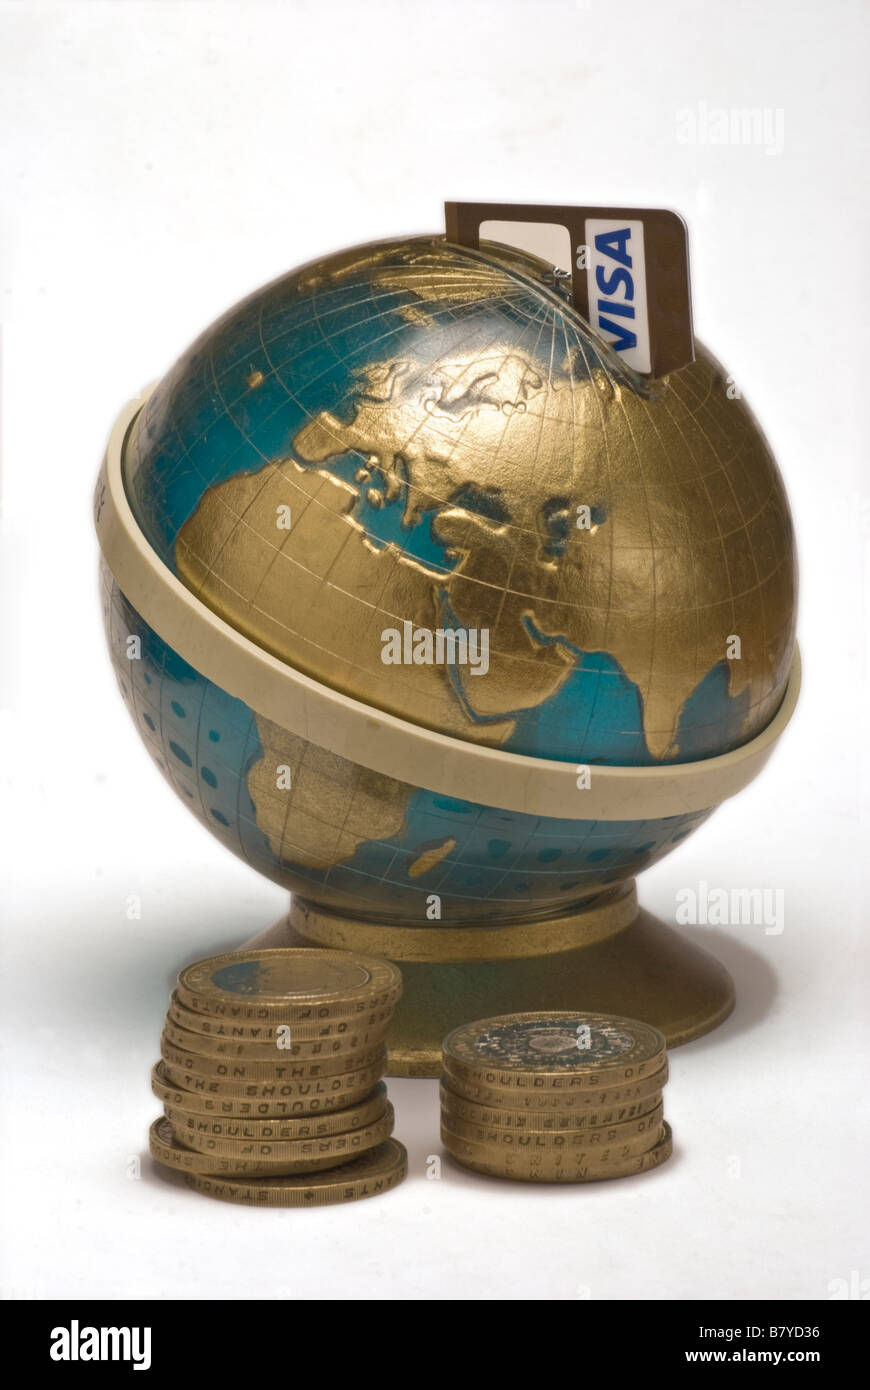 A money box in the shape of a globe Stock Photo